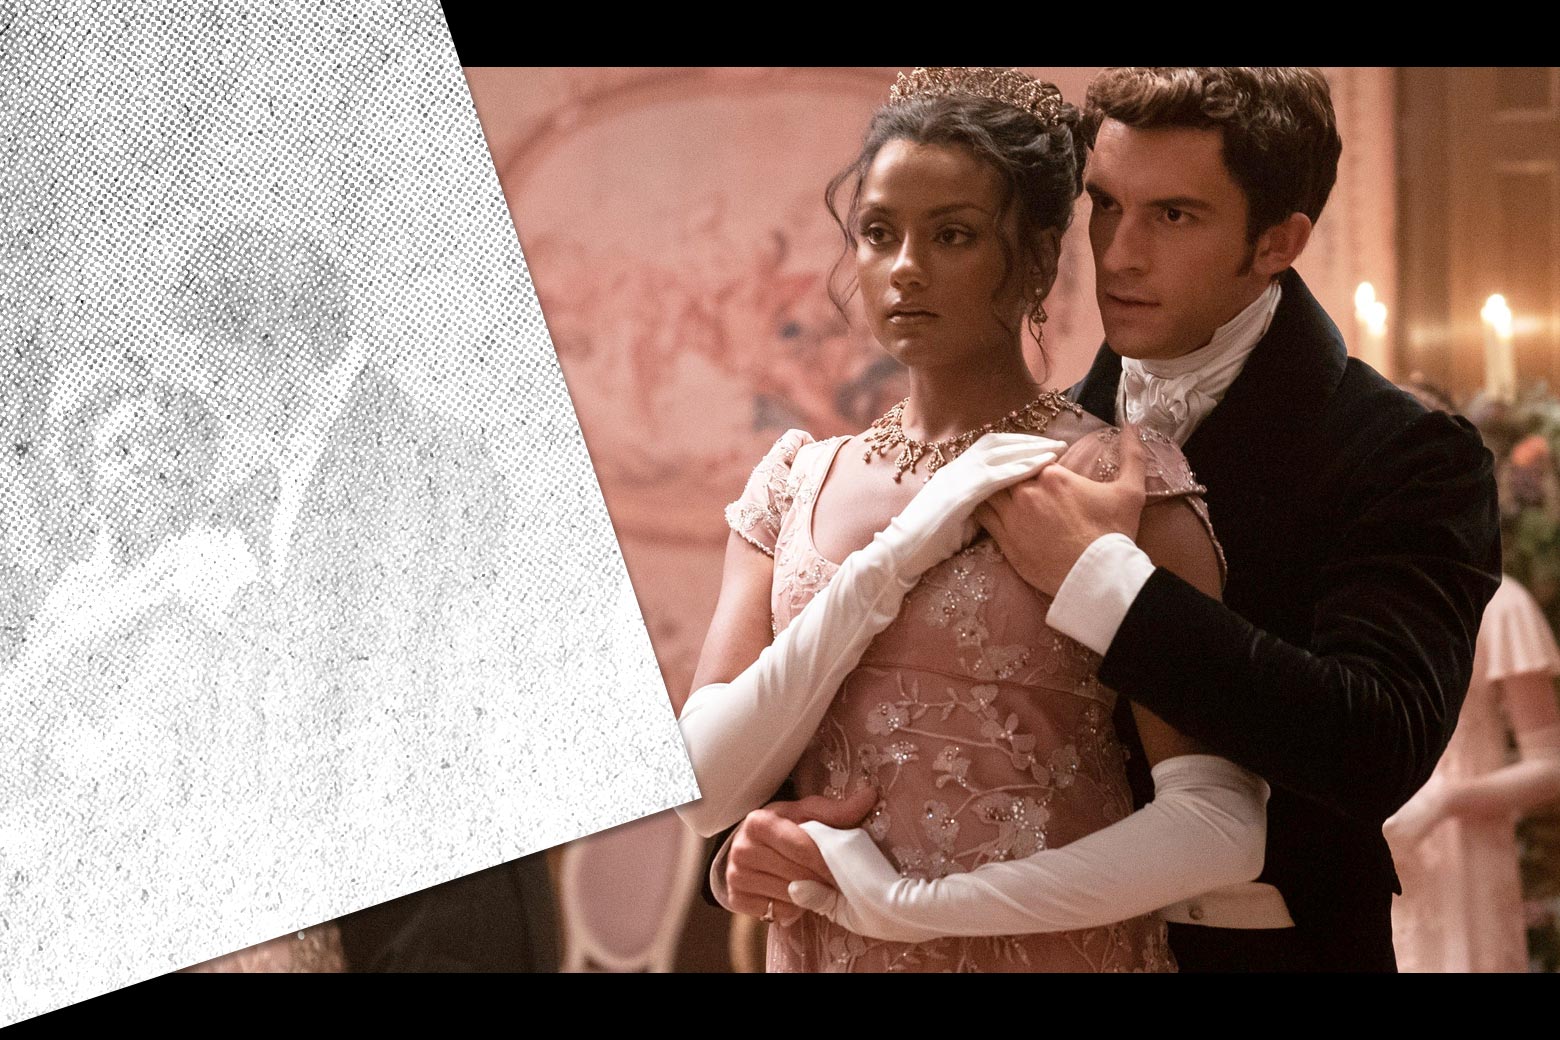 Jonathan Bailey stands behind Simone Ashley as they dance in a ballroom.